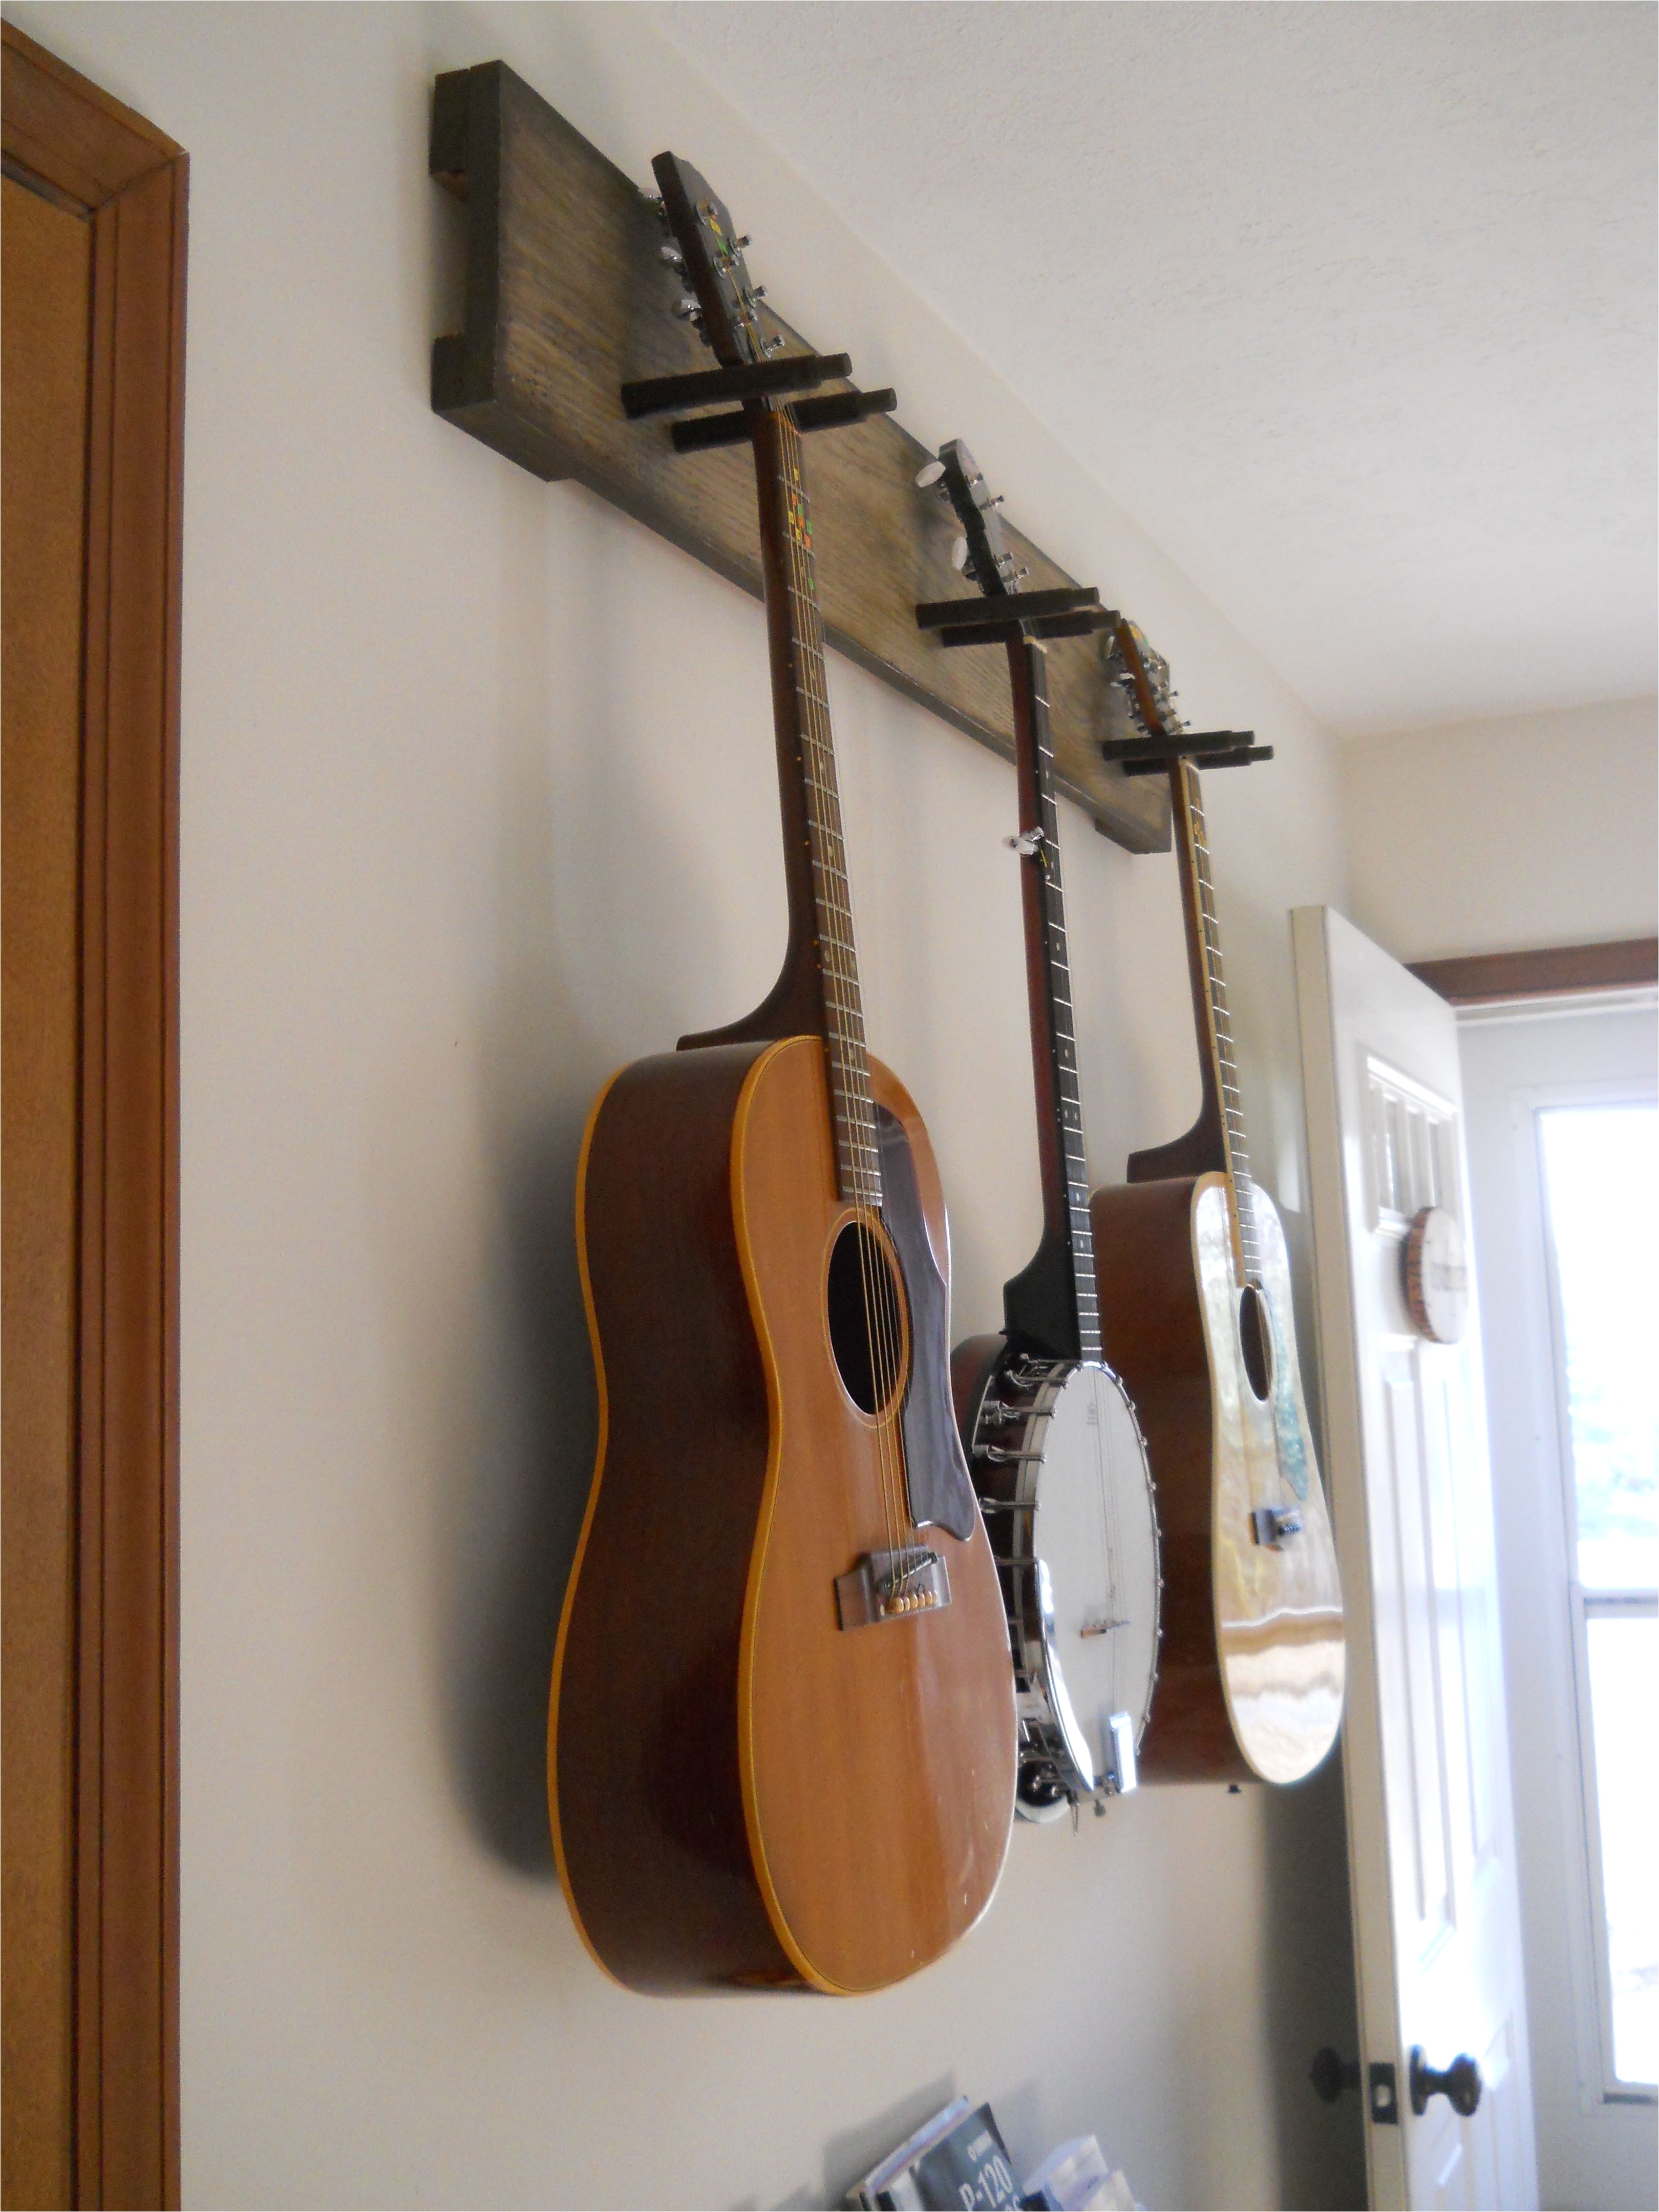 diy guitar hanger simple secure we practice so much more since we ve put this up